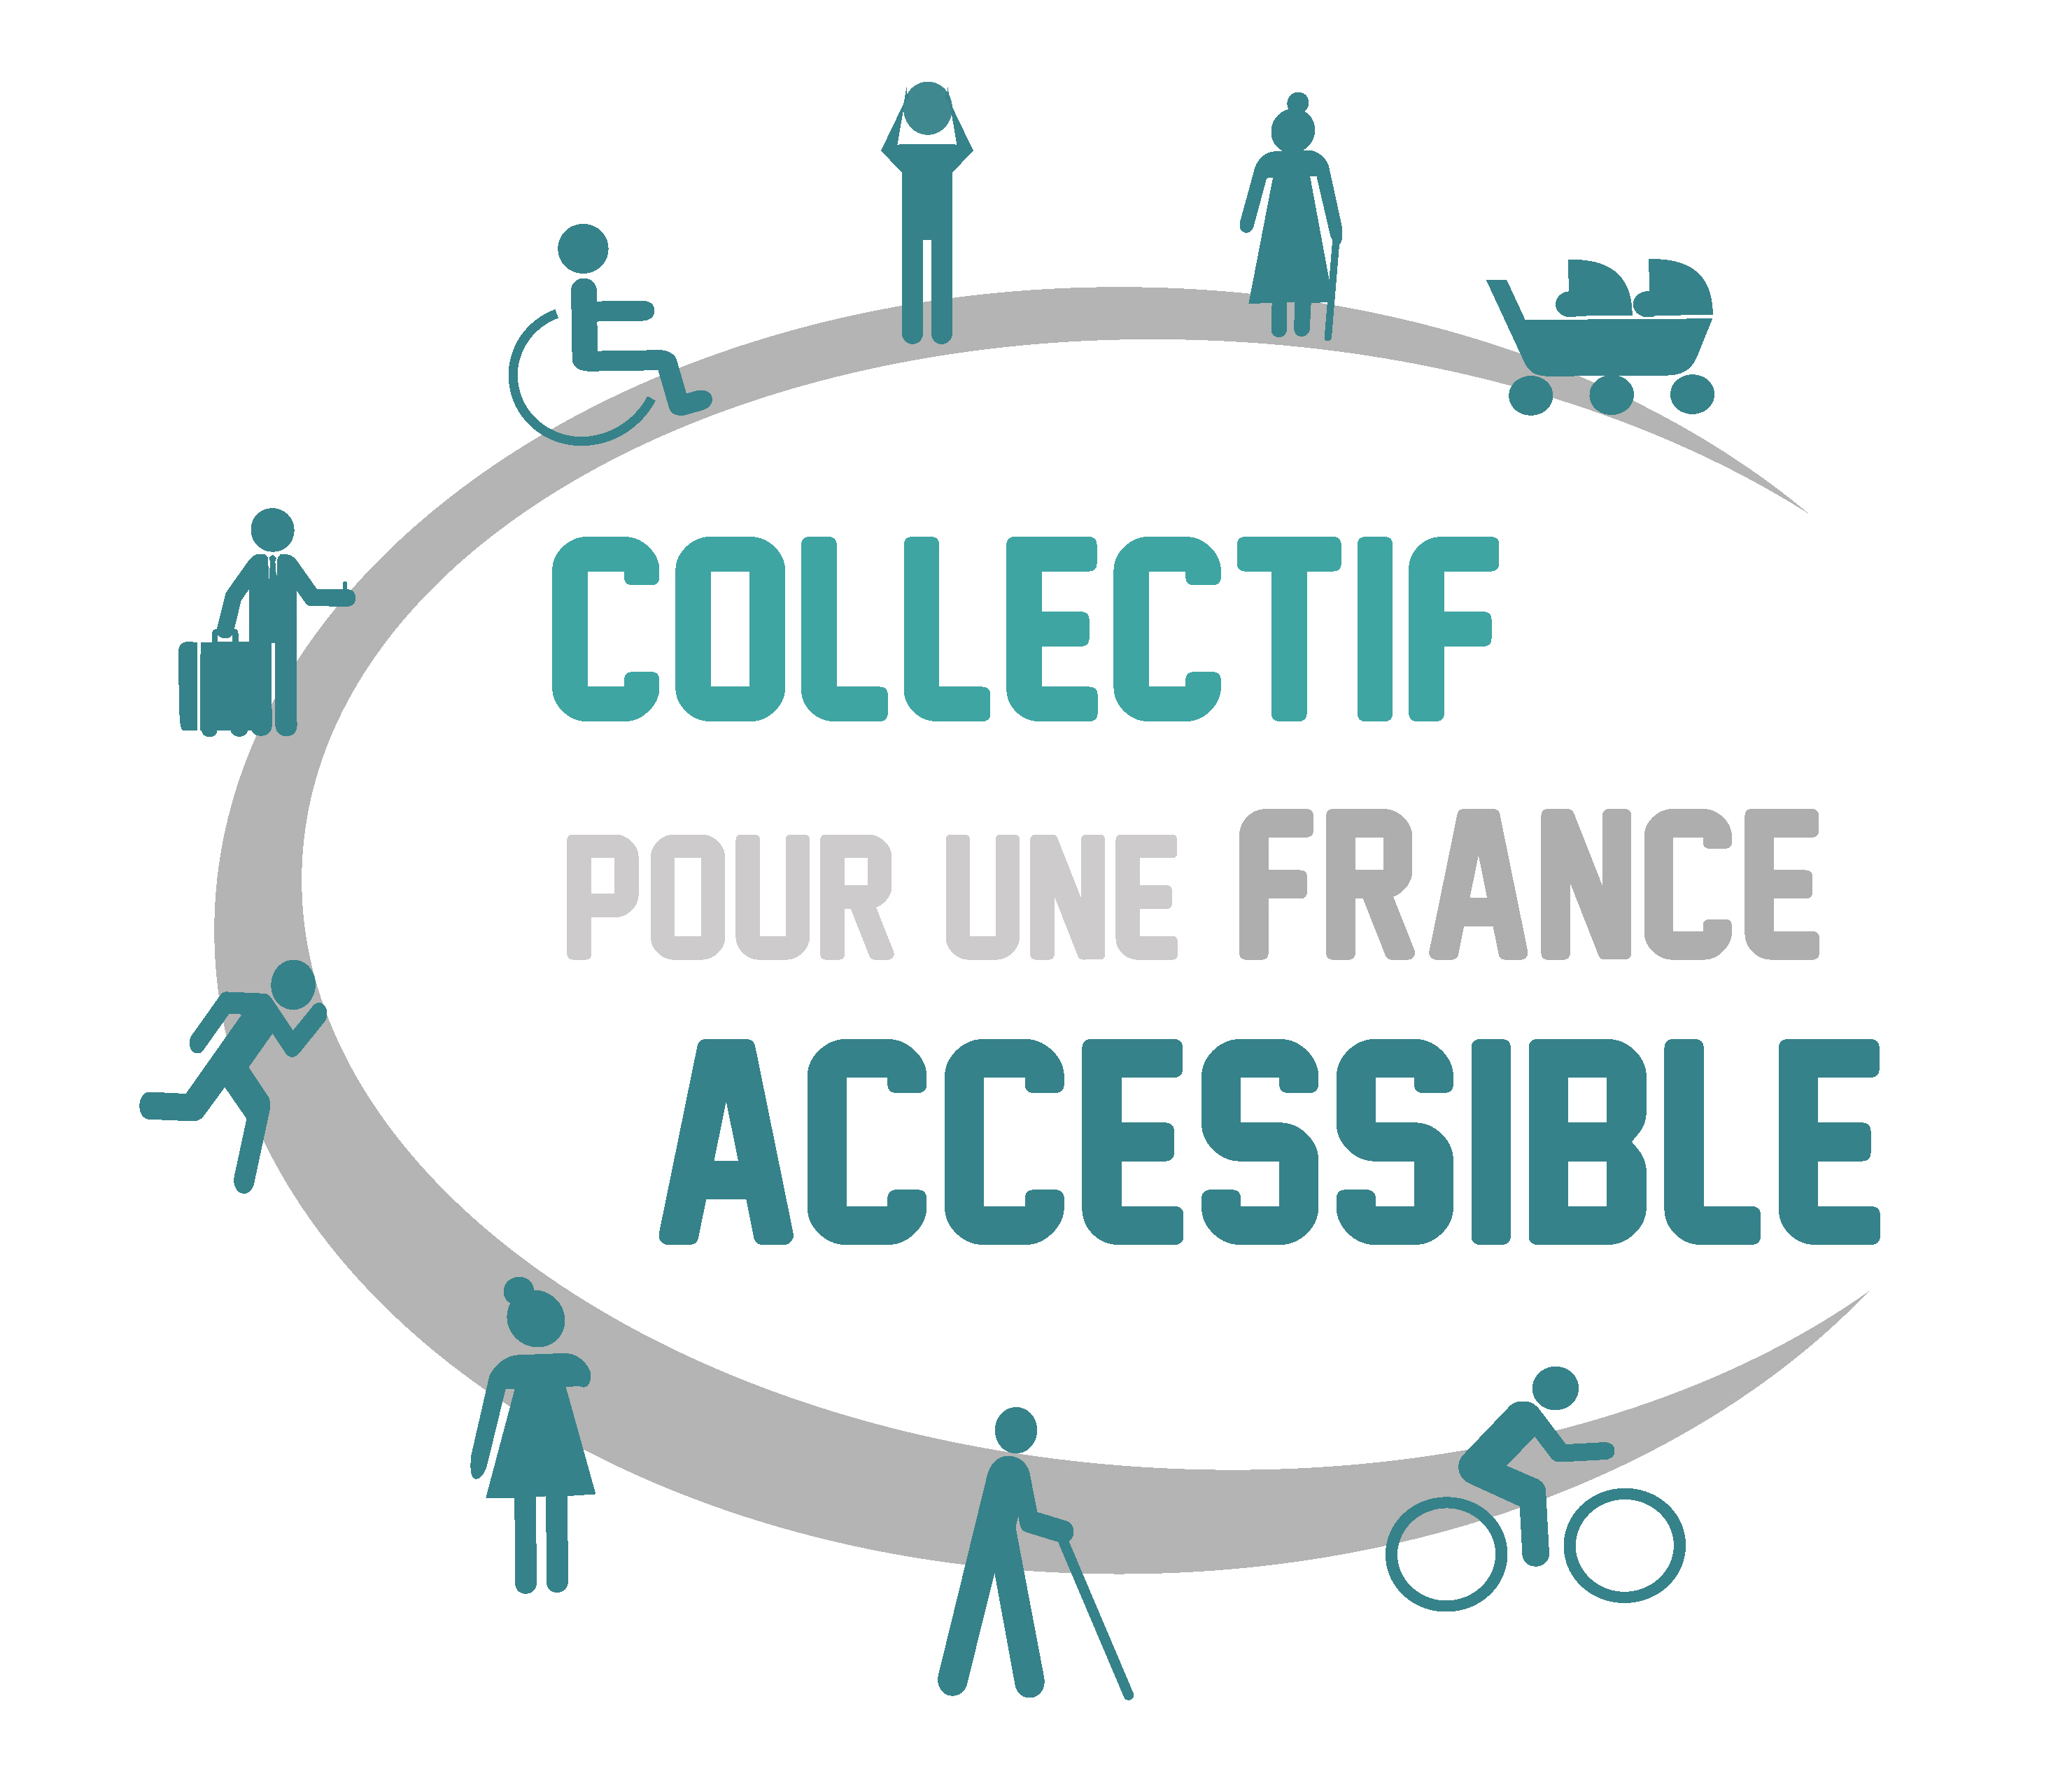 http://collectifpourunefranceaccessible.blogs.apf.asso.fr/images/CollectifpouruneFranceAccessHD.jpg